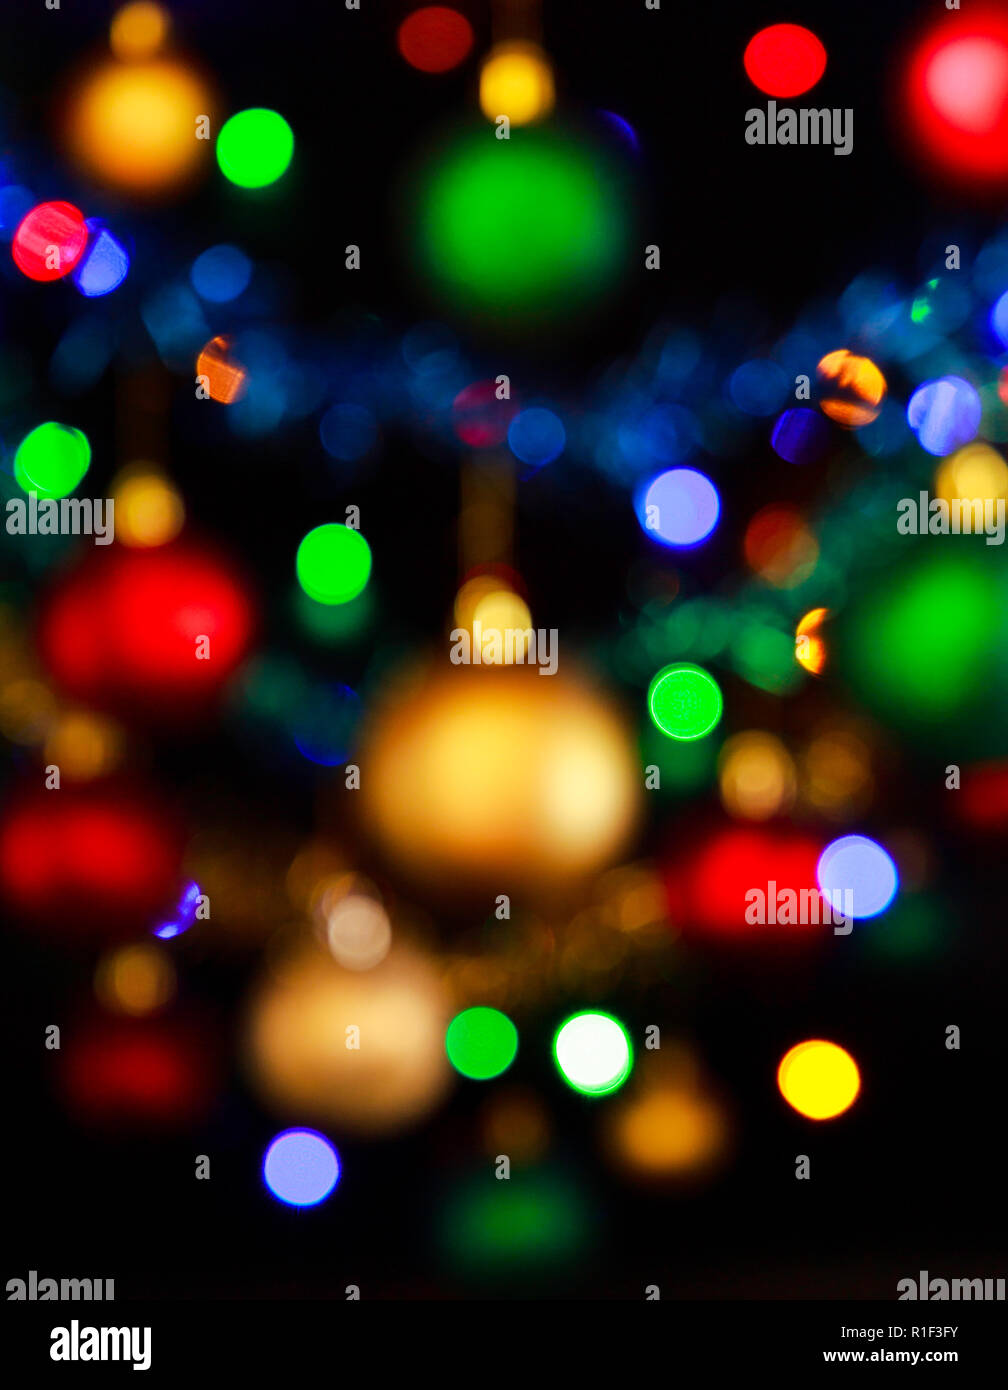 Bokeh of Christmas lights and blurred Christmas decorations with reds, greens, blues, yellows/golds and white colours. Stock Photo